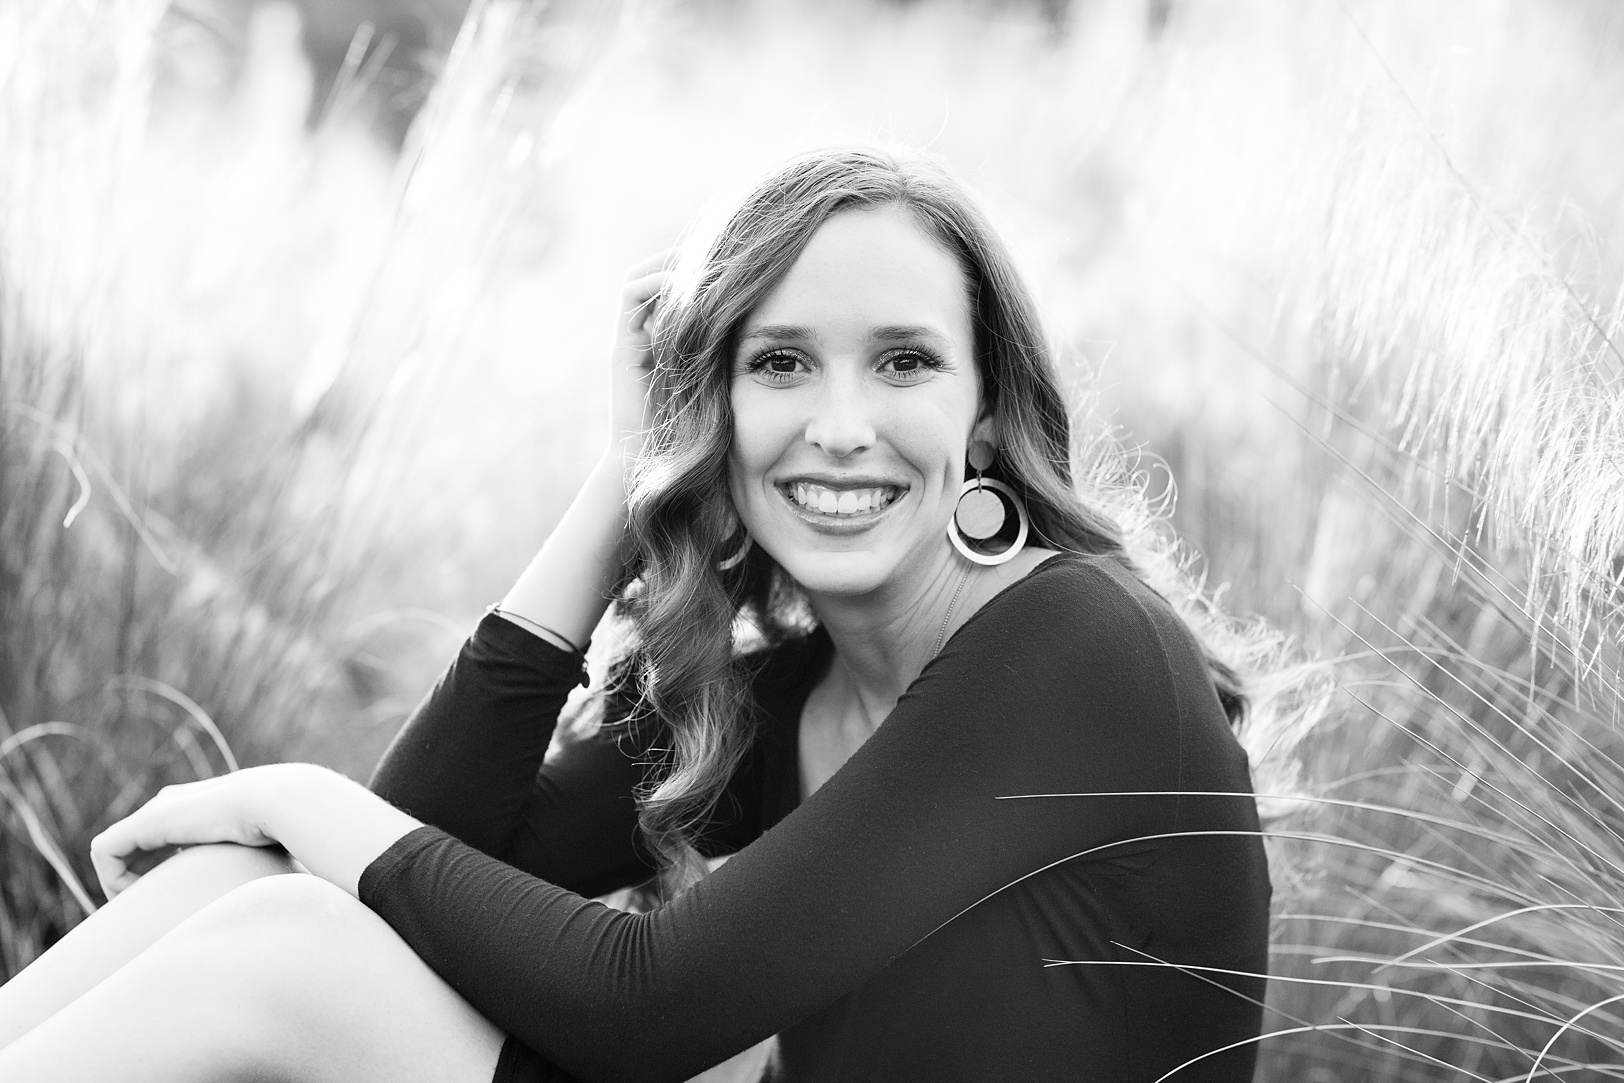 BW Smiling Girl in field | Kaitlin Scott Photography